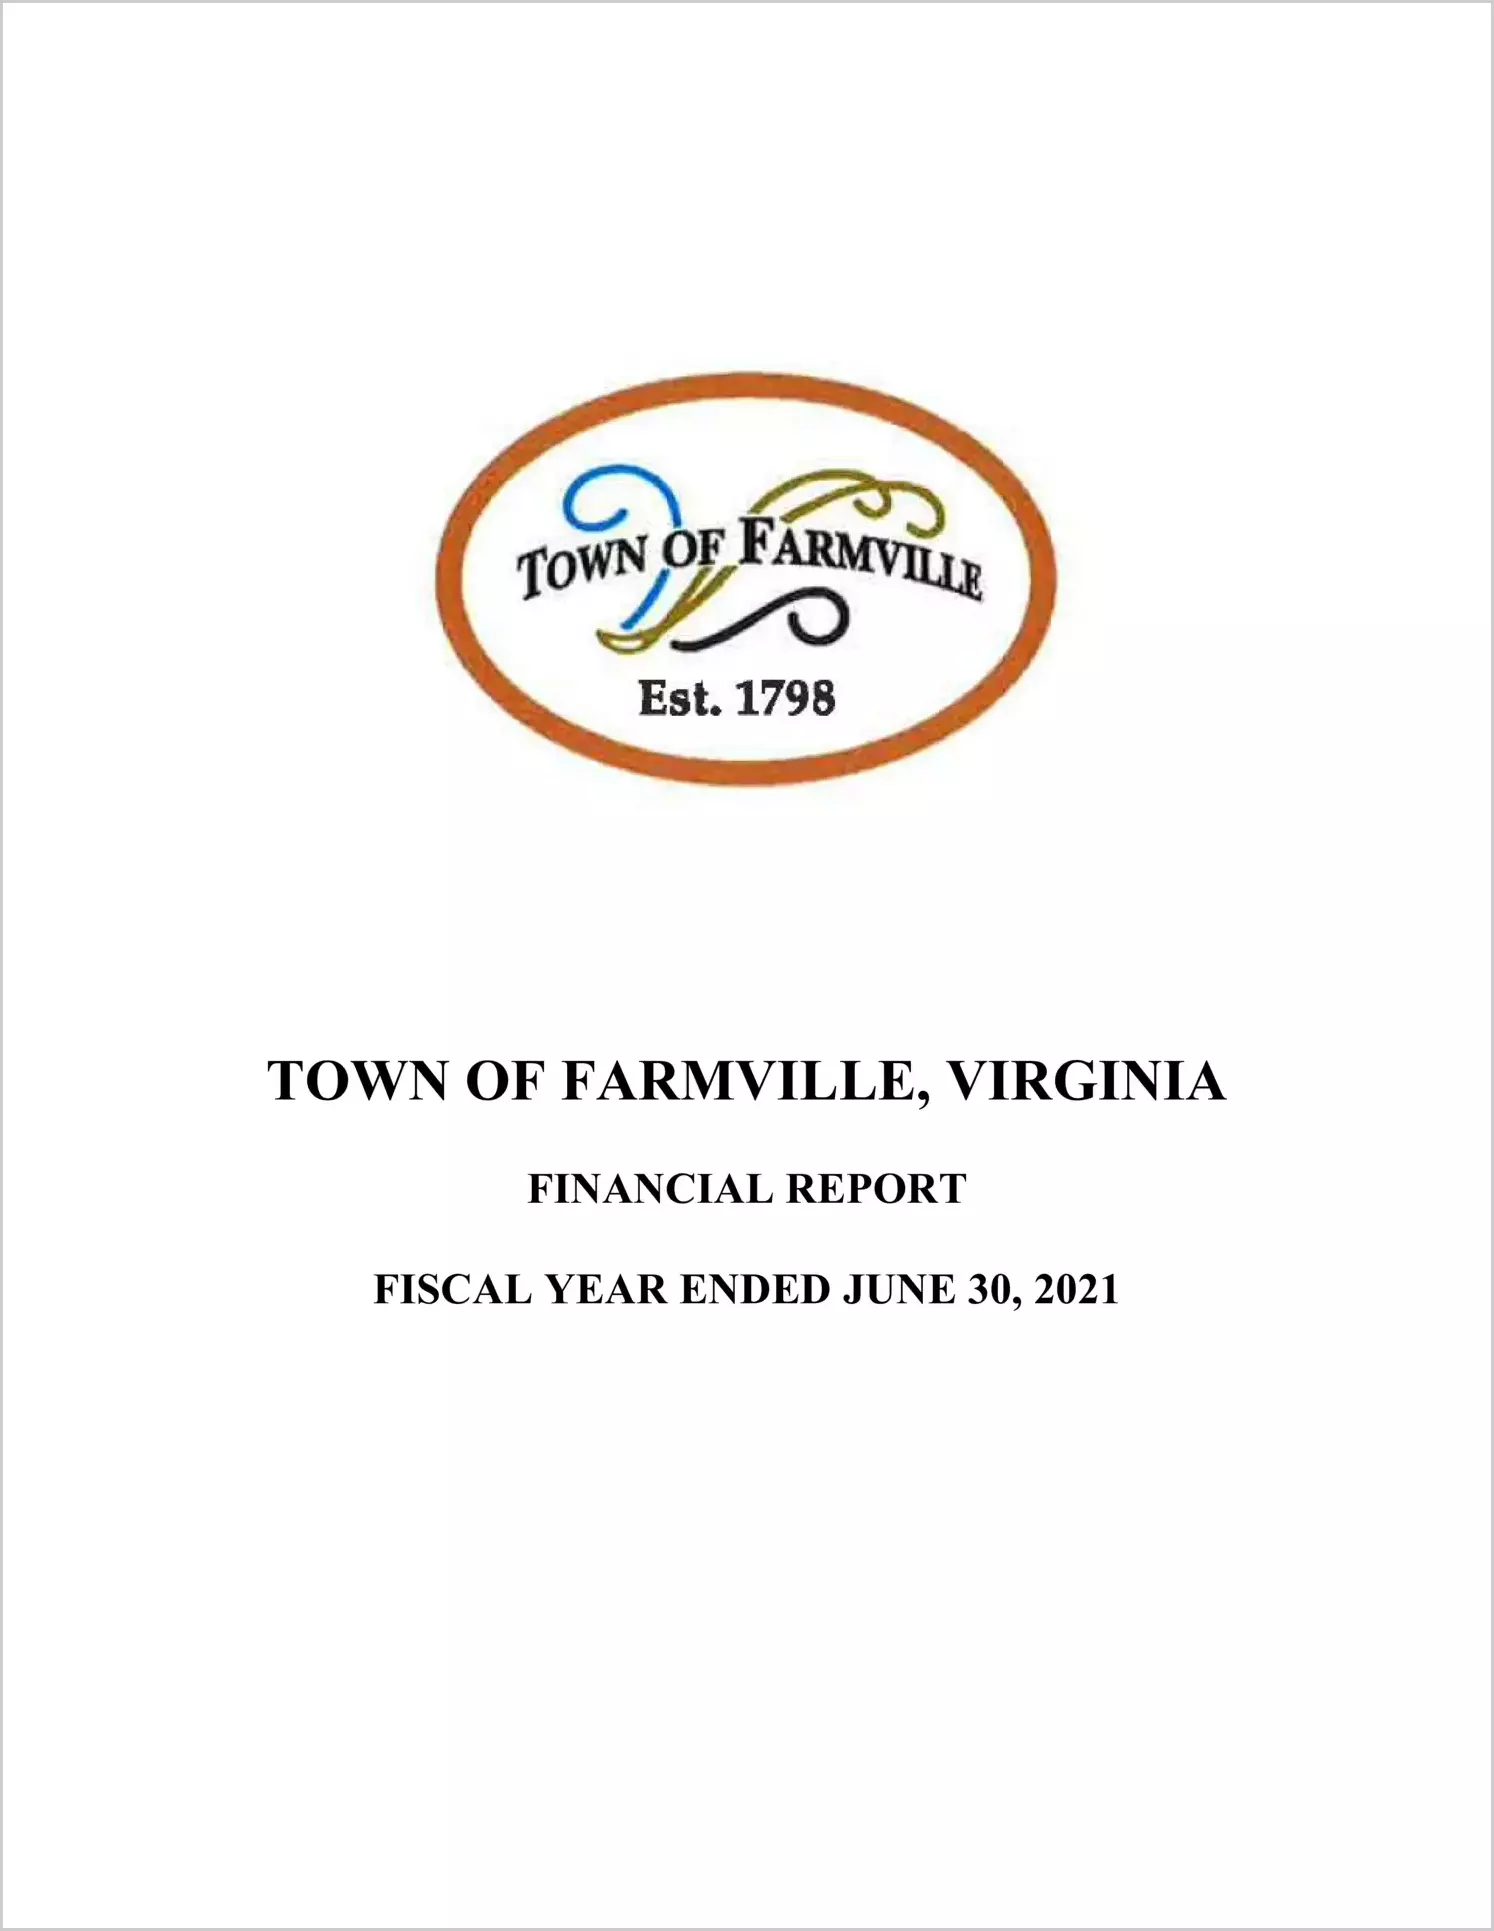 2021 Annual Financial Report for Town of Farmville